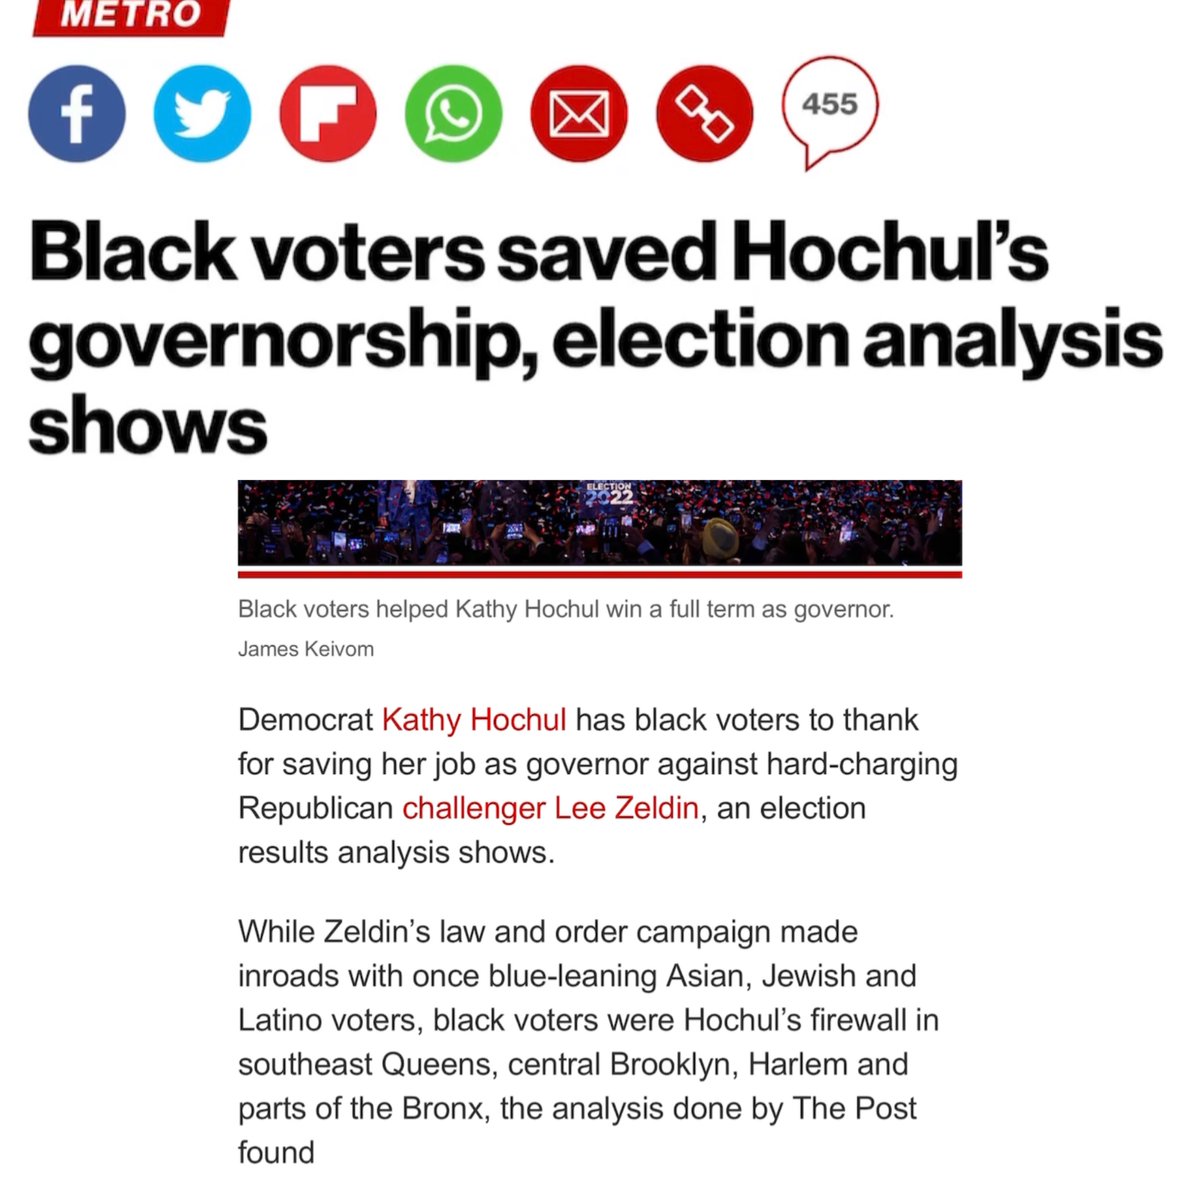 Recently, the governor of NY said black kids in the Bronx don’t know what a computer is. I’m not surprised because that’s the way people like her think. Joe Biden has made similar comments on multiple occasions. What I want to know is, why do black folk continue to vote for…